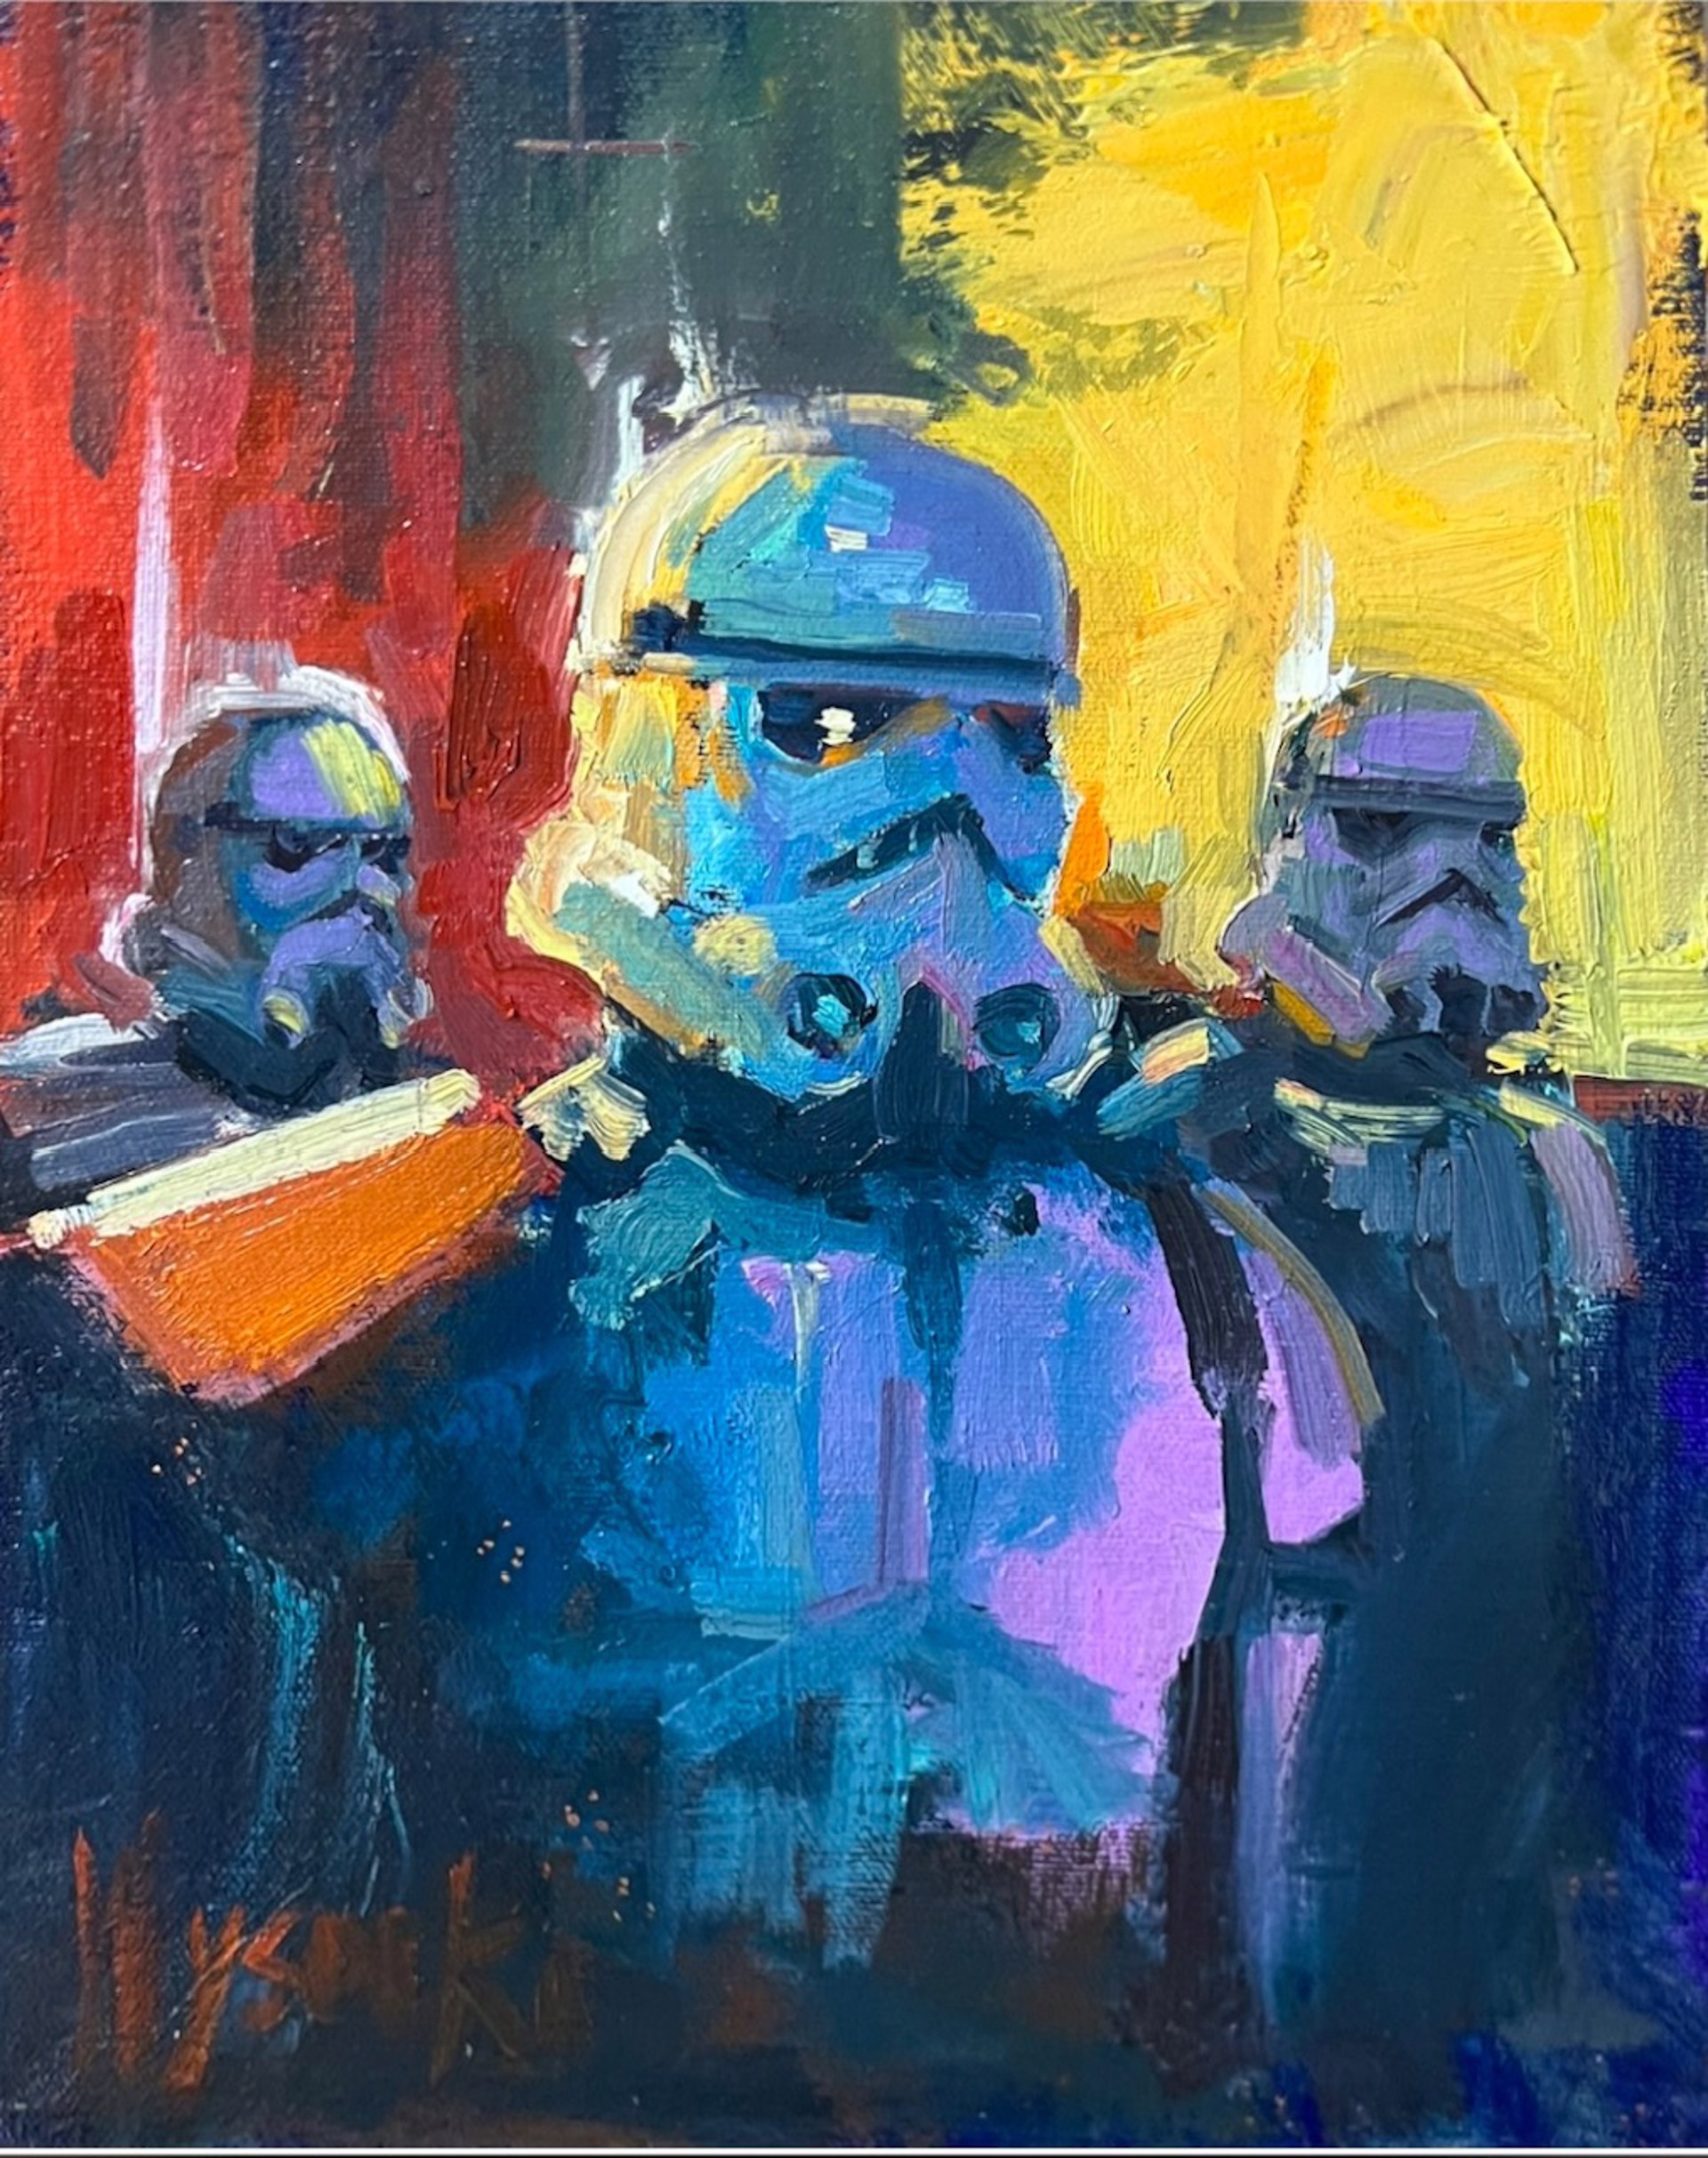 STORM TROOPER CORP JOIN NOW! by Stephen Wysocki